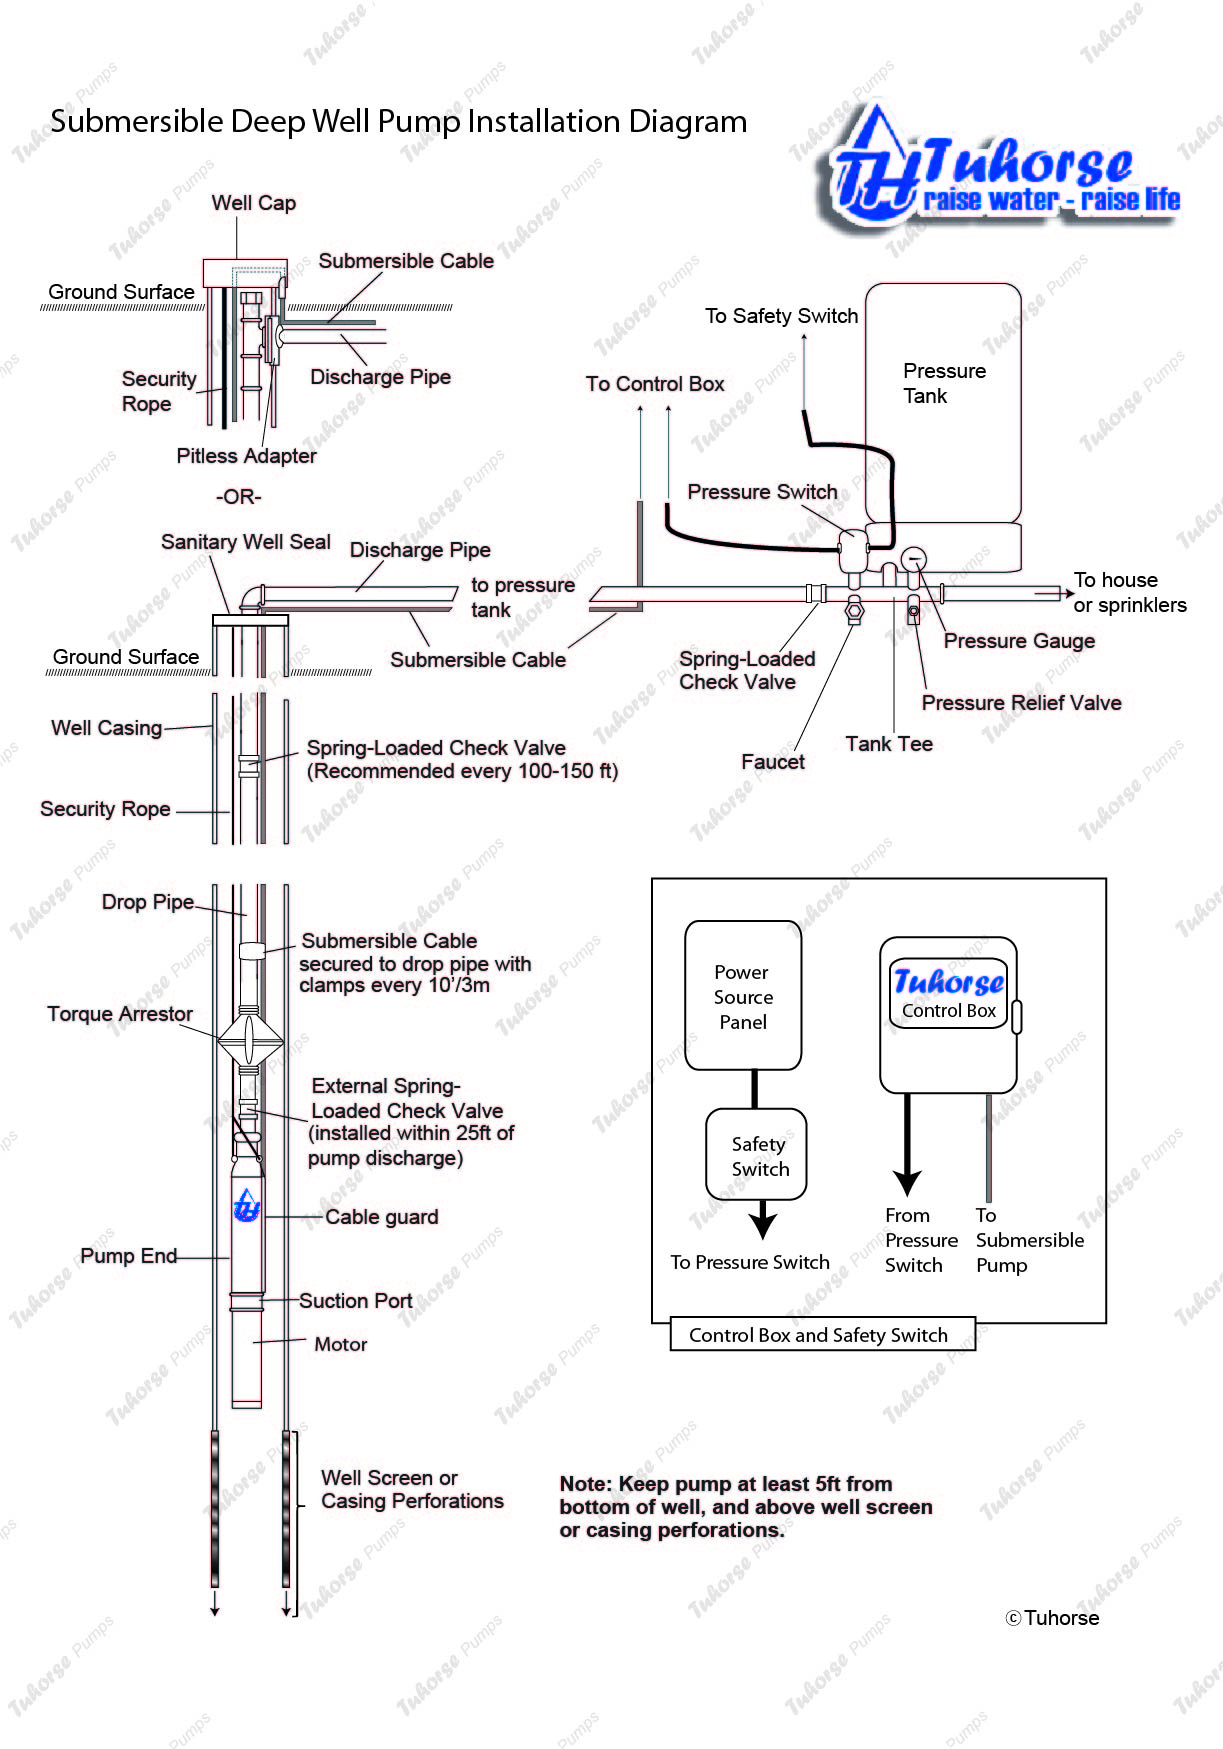 Water Well Wiring - Wiring Diagram Data - Submersible Well Pump Wiring Diagram